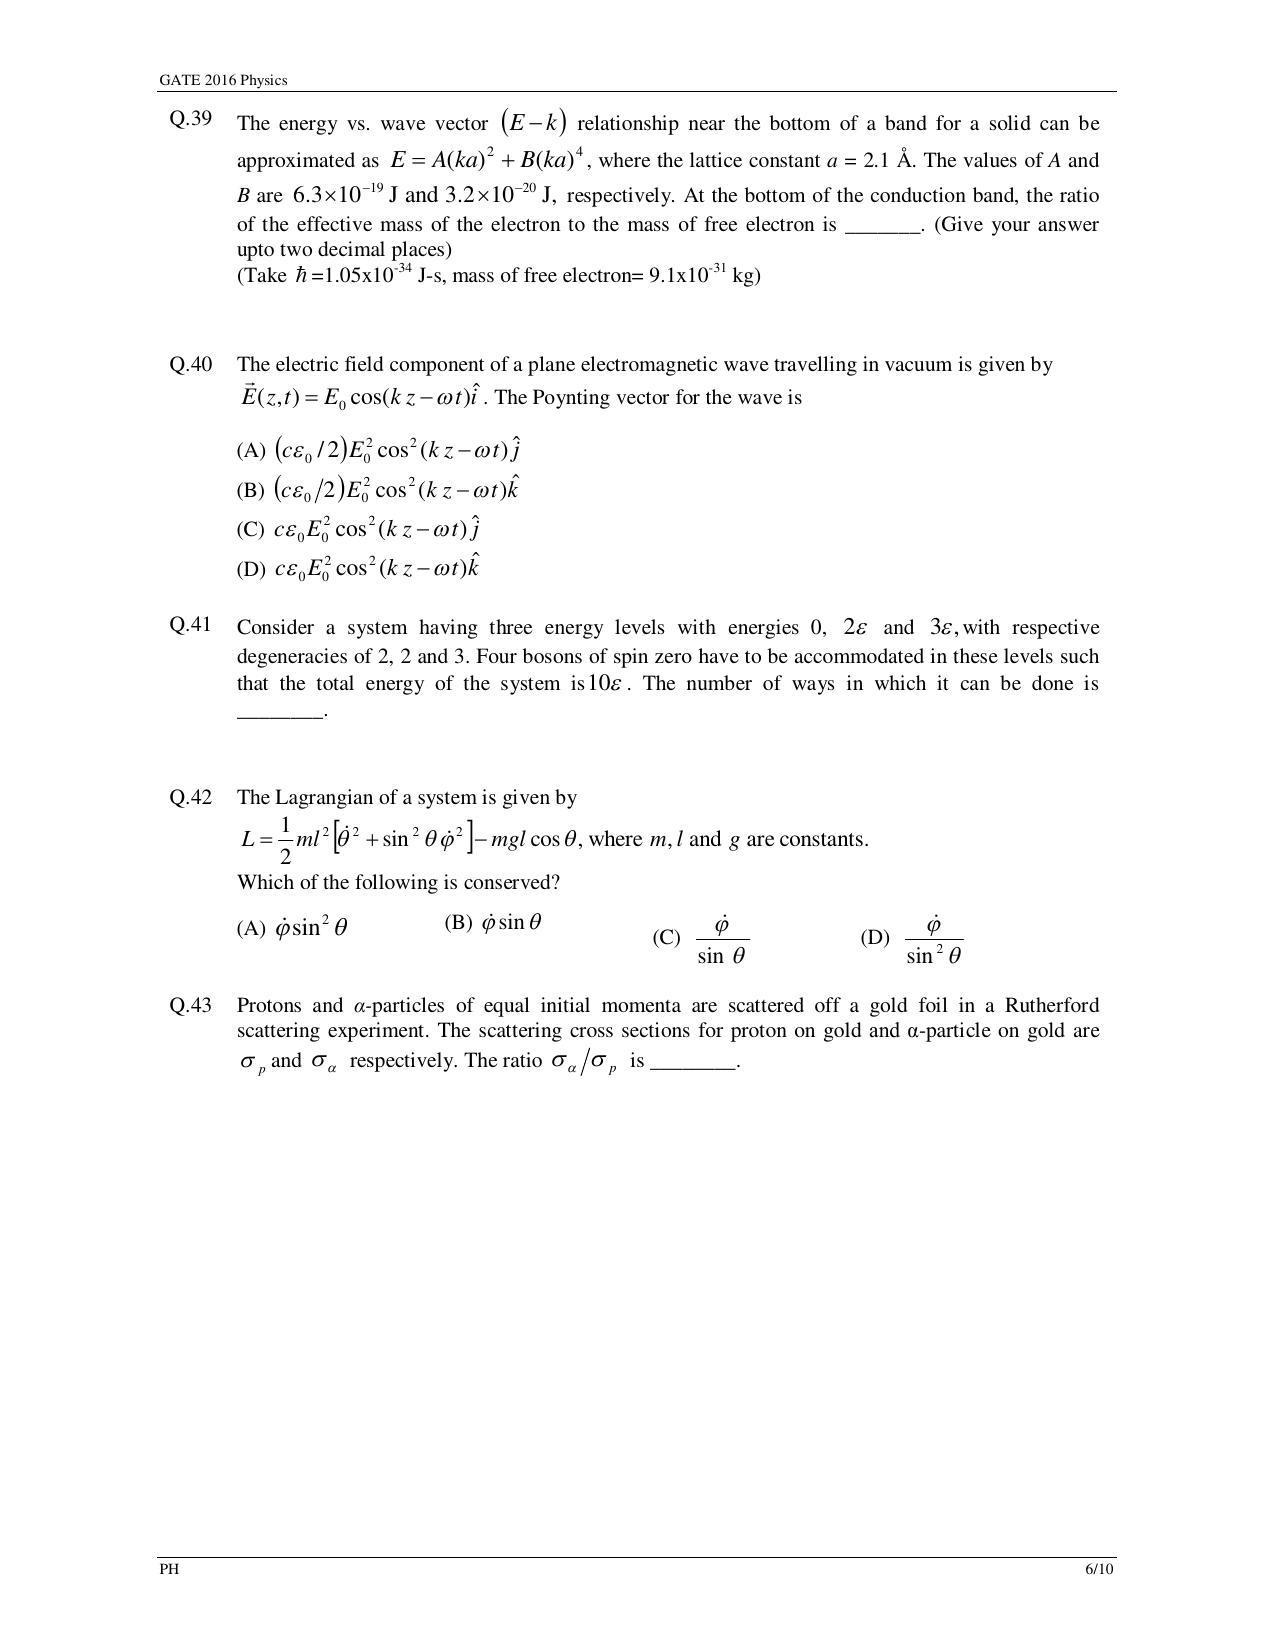 GATE 2016 Physics (PH) Question Paper with Answer Key - Page 9